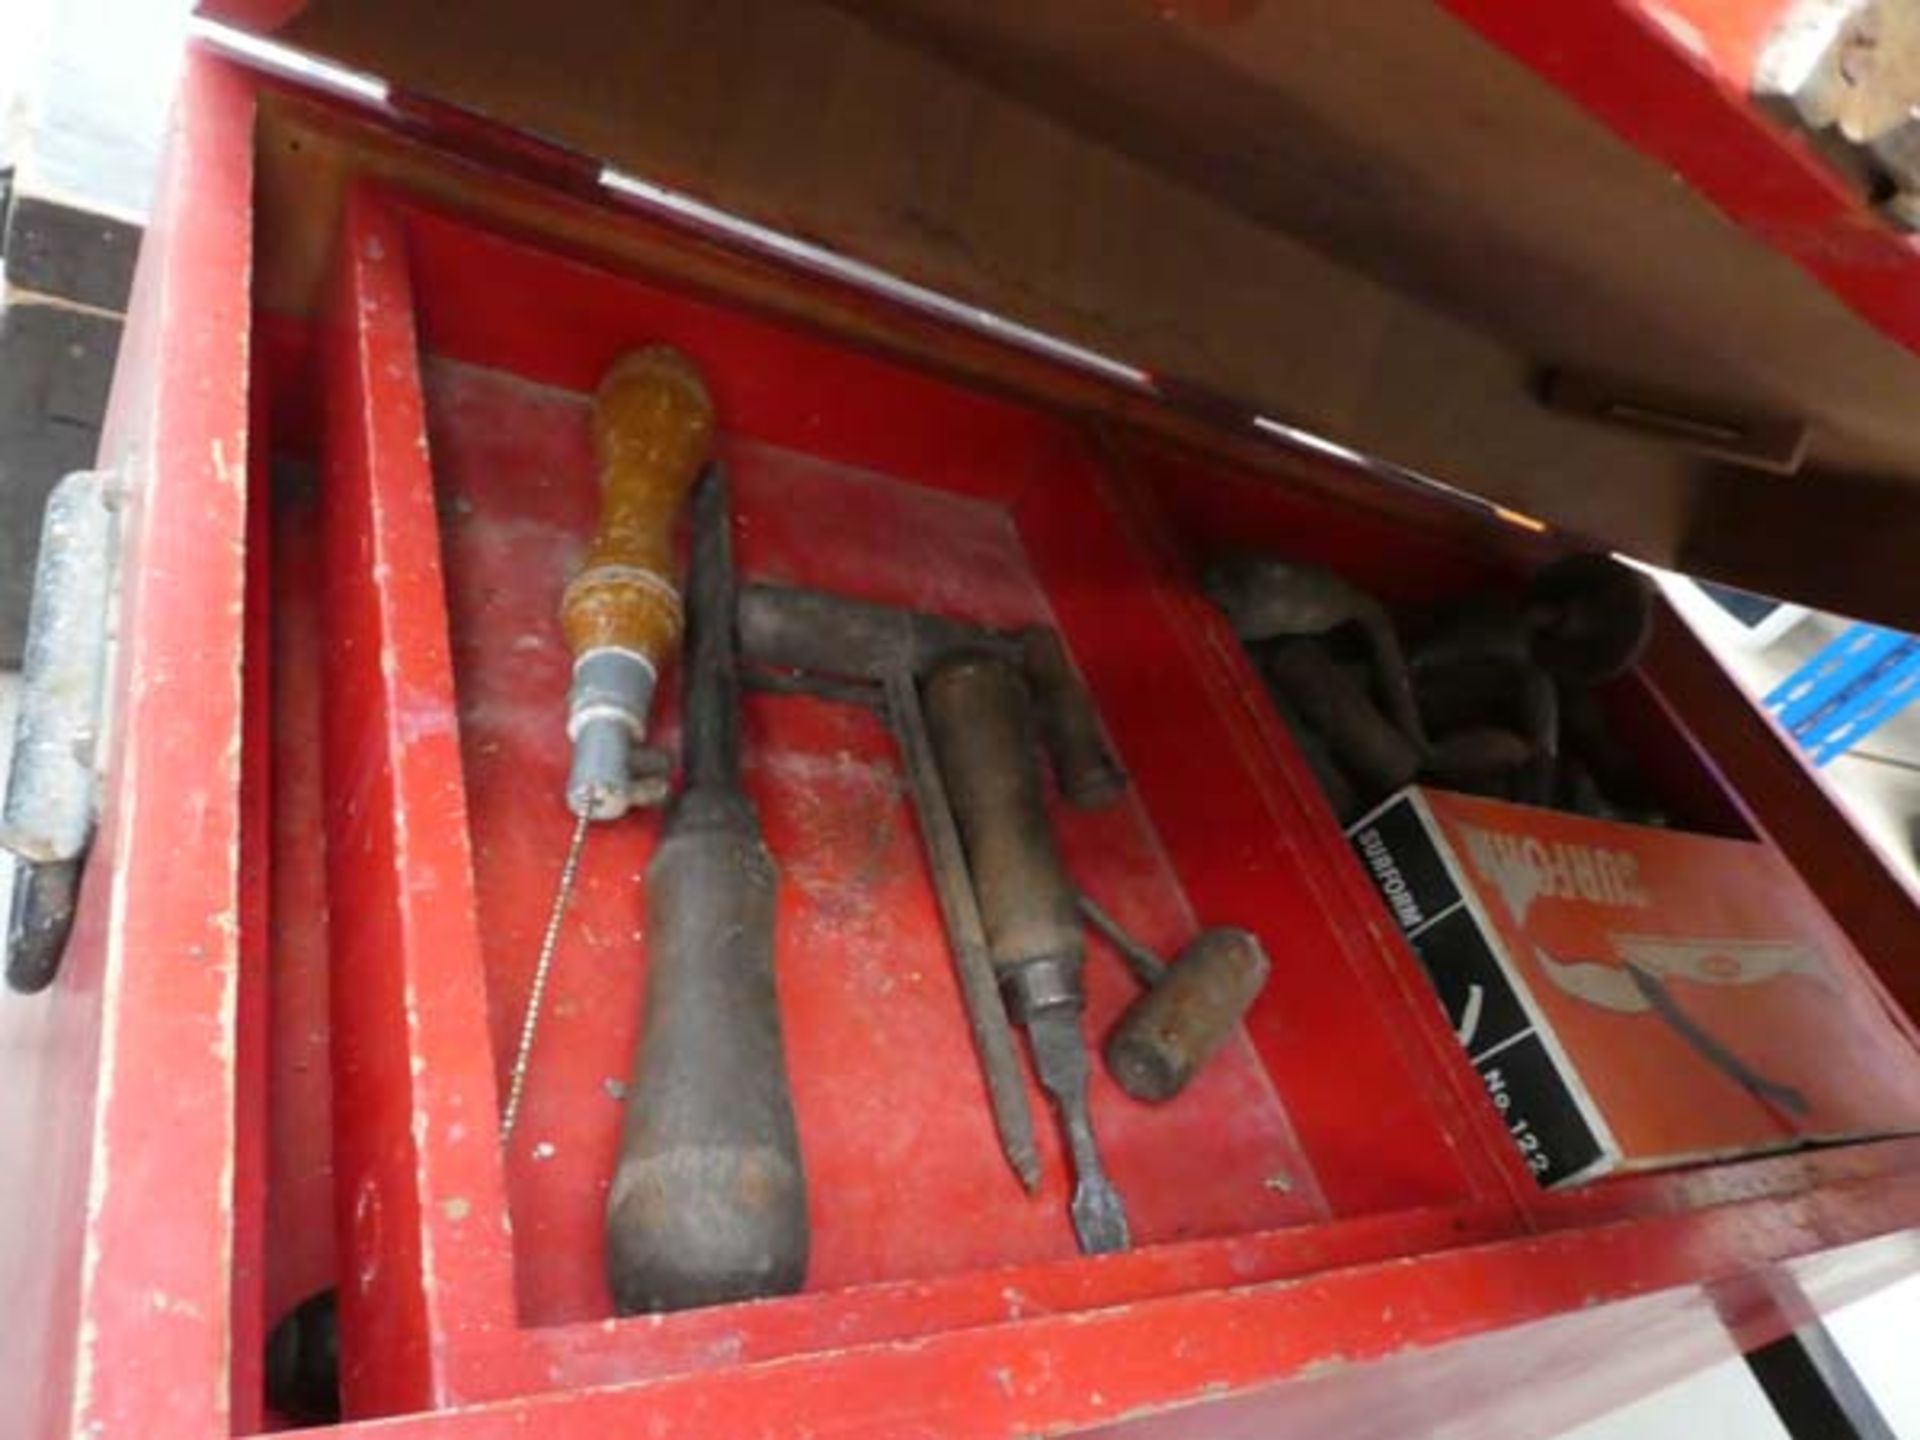 Large red carpenters tool box with hand drills, chisels, mini saws etc.